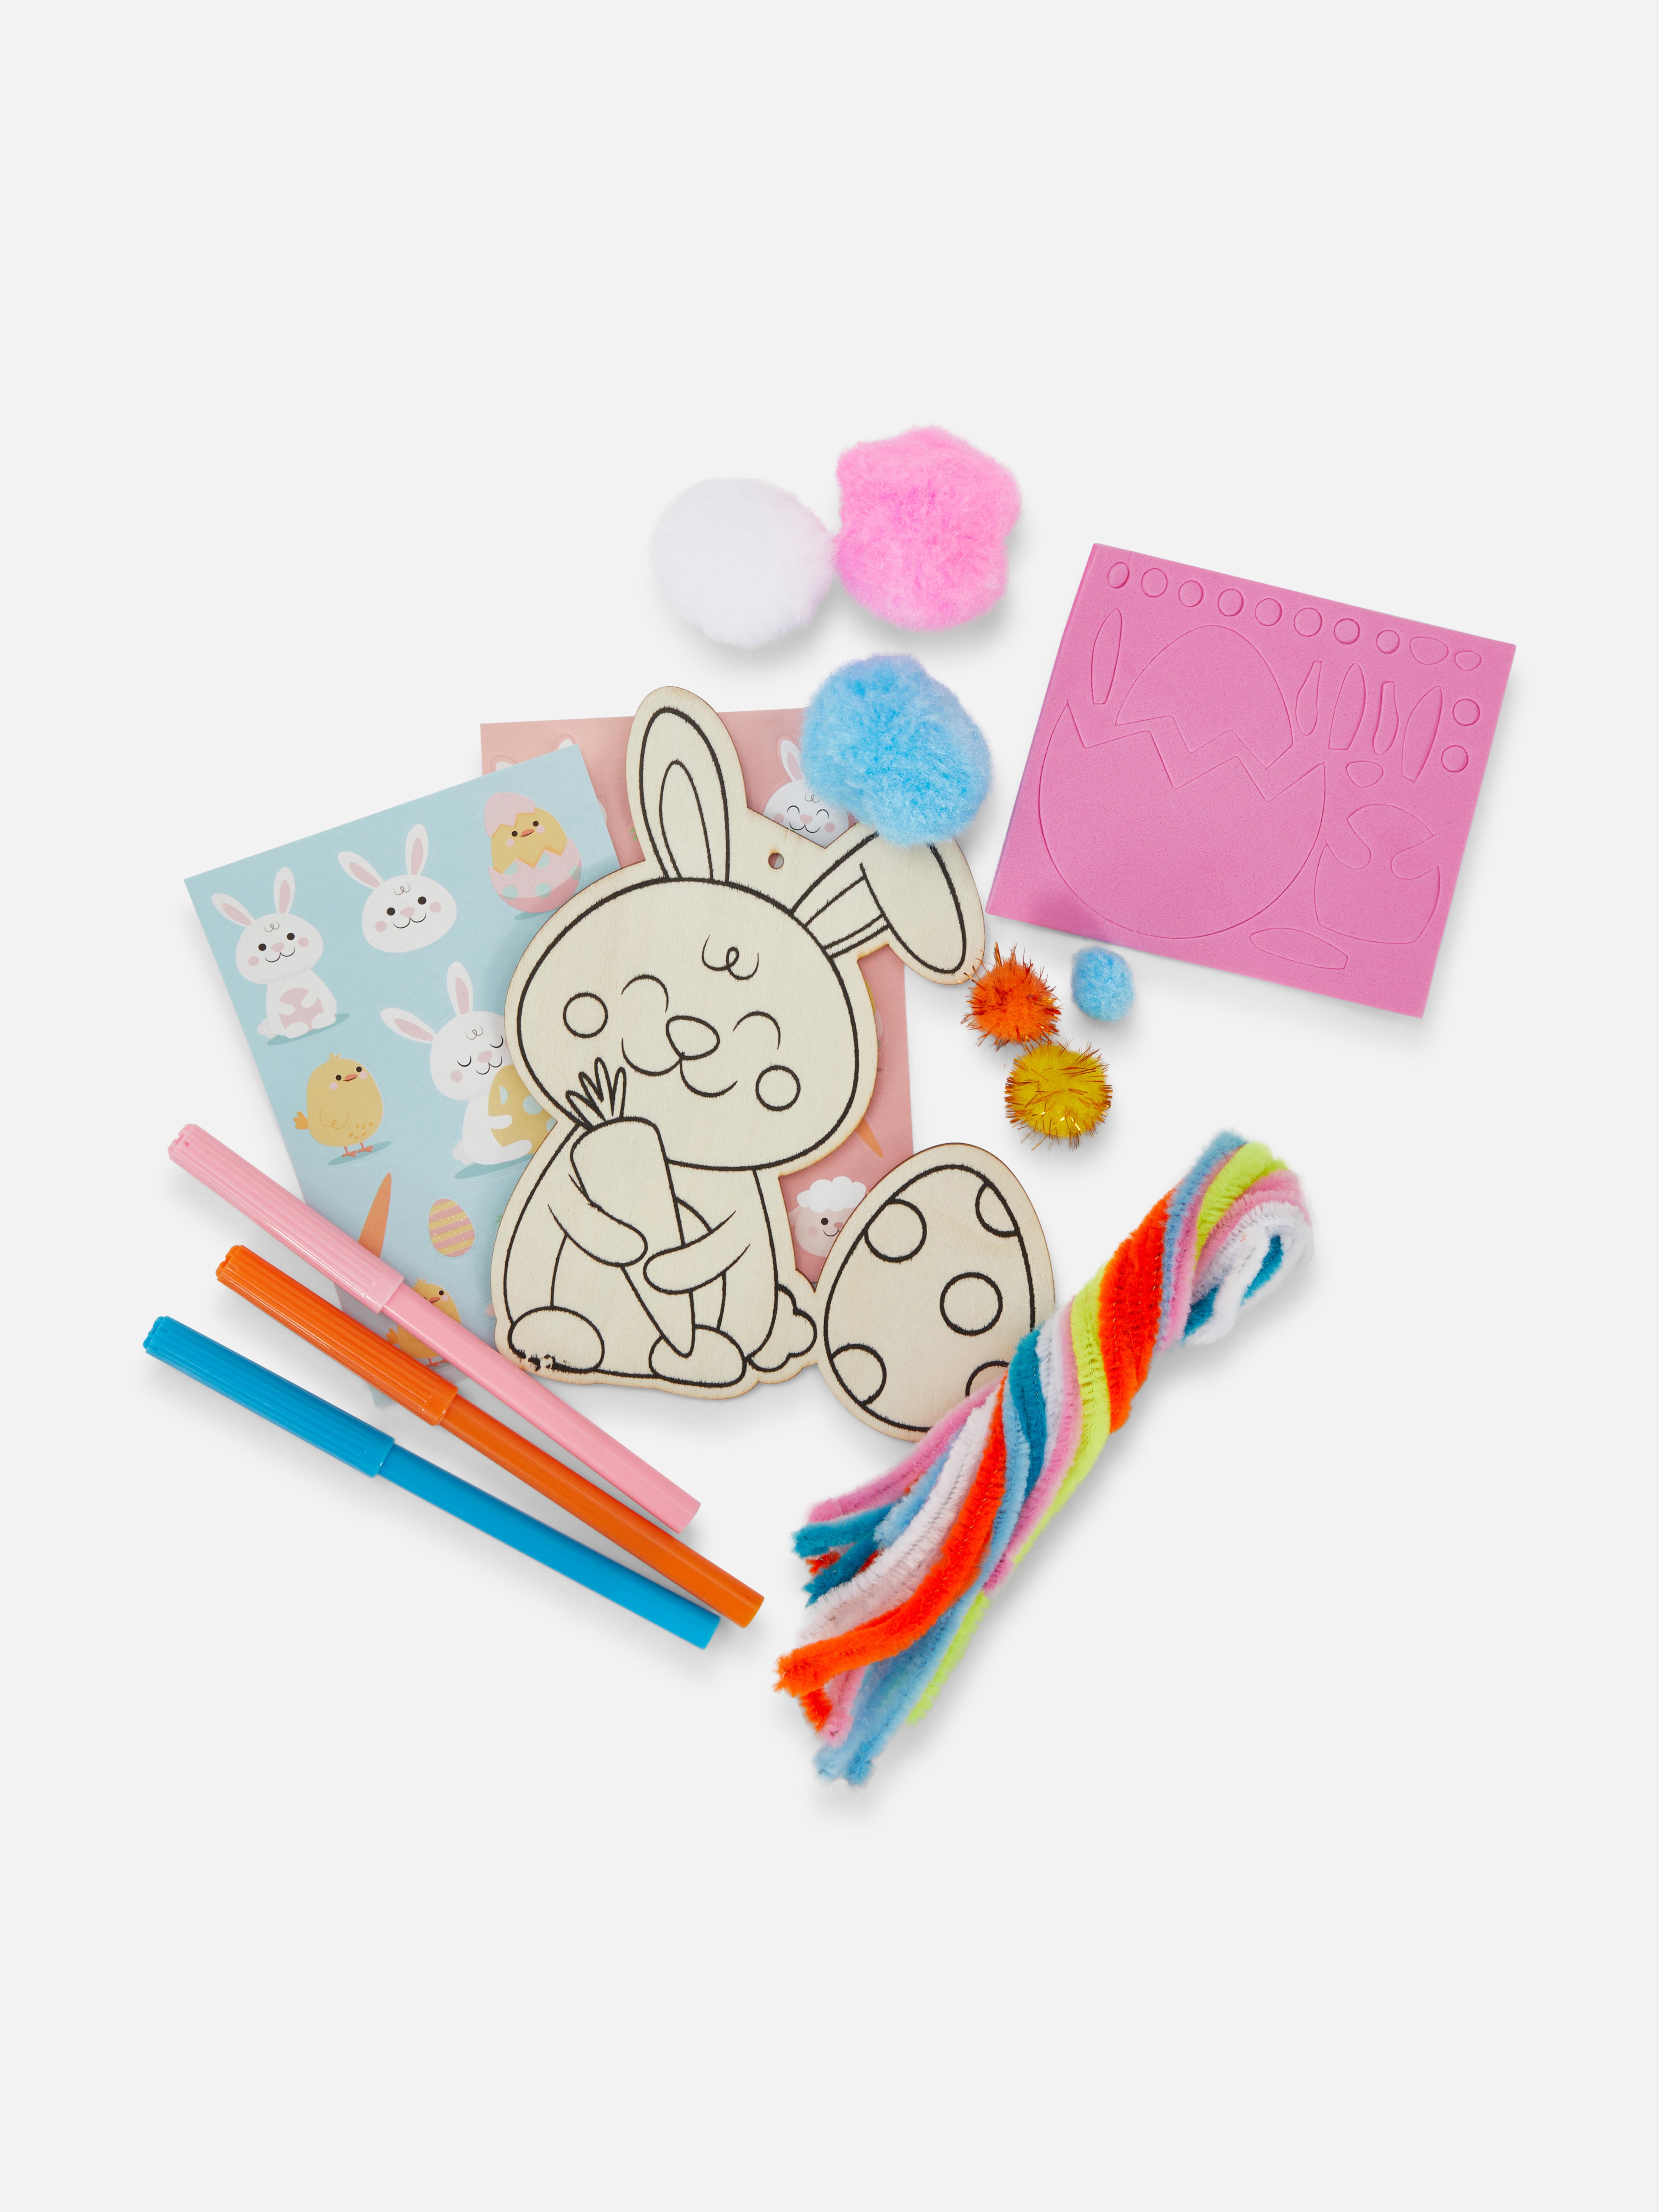 Easter Craft Tub